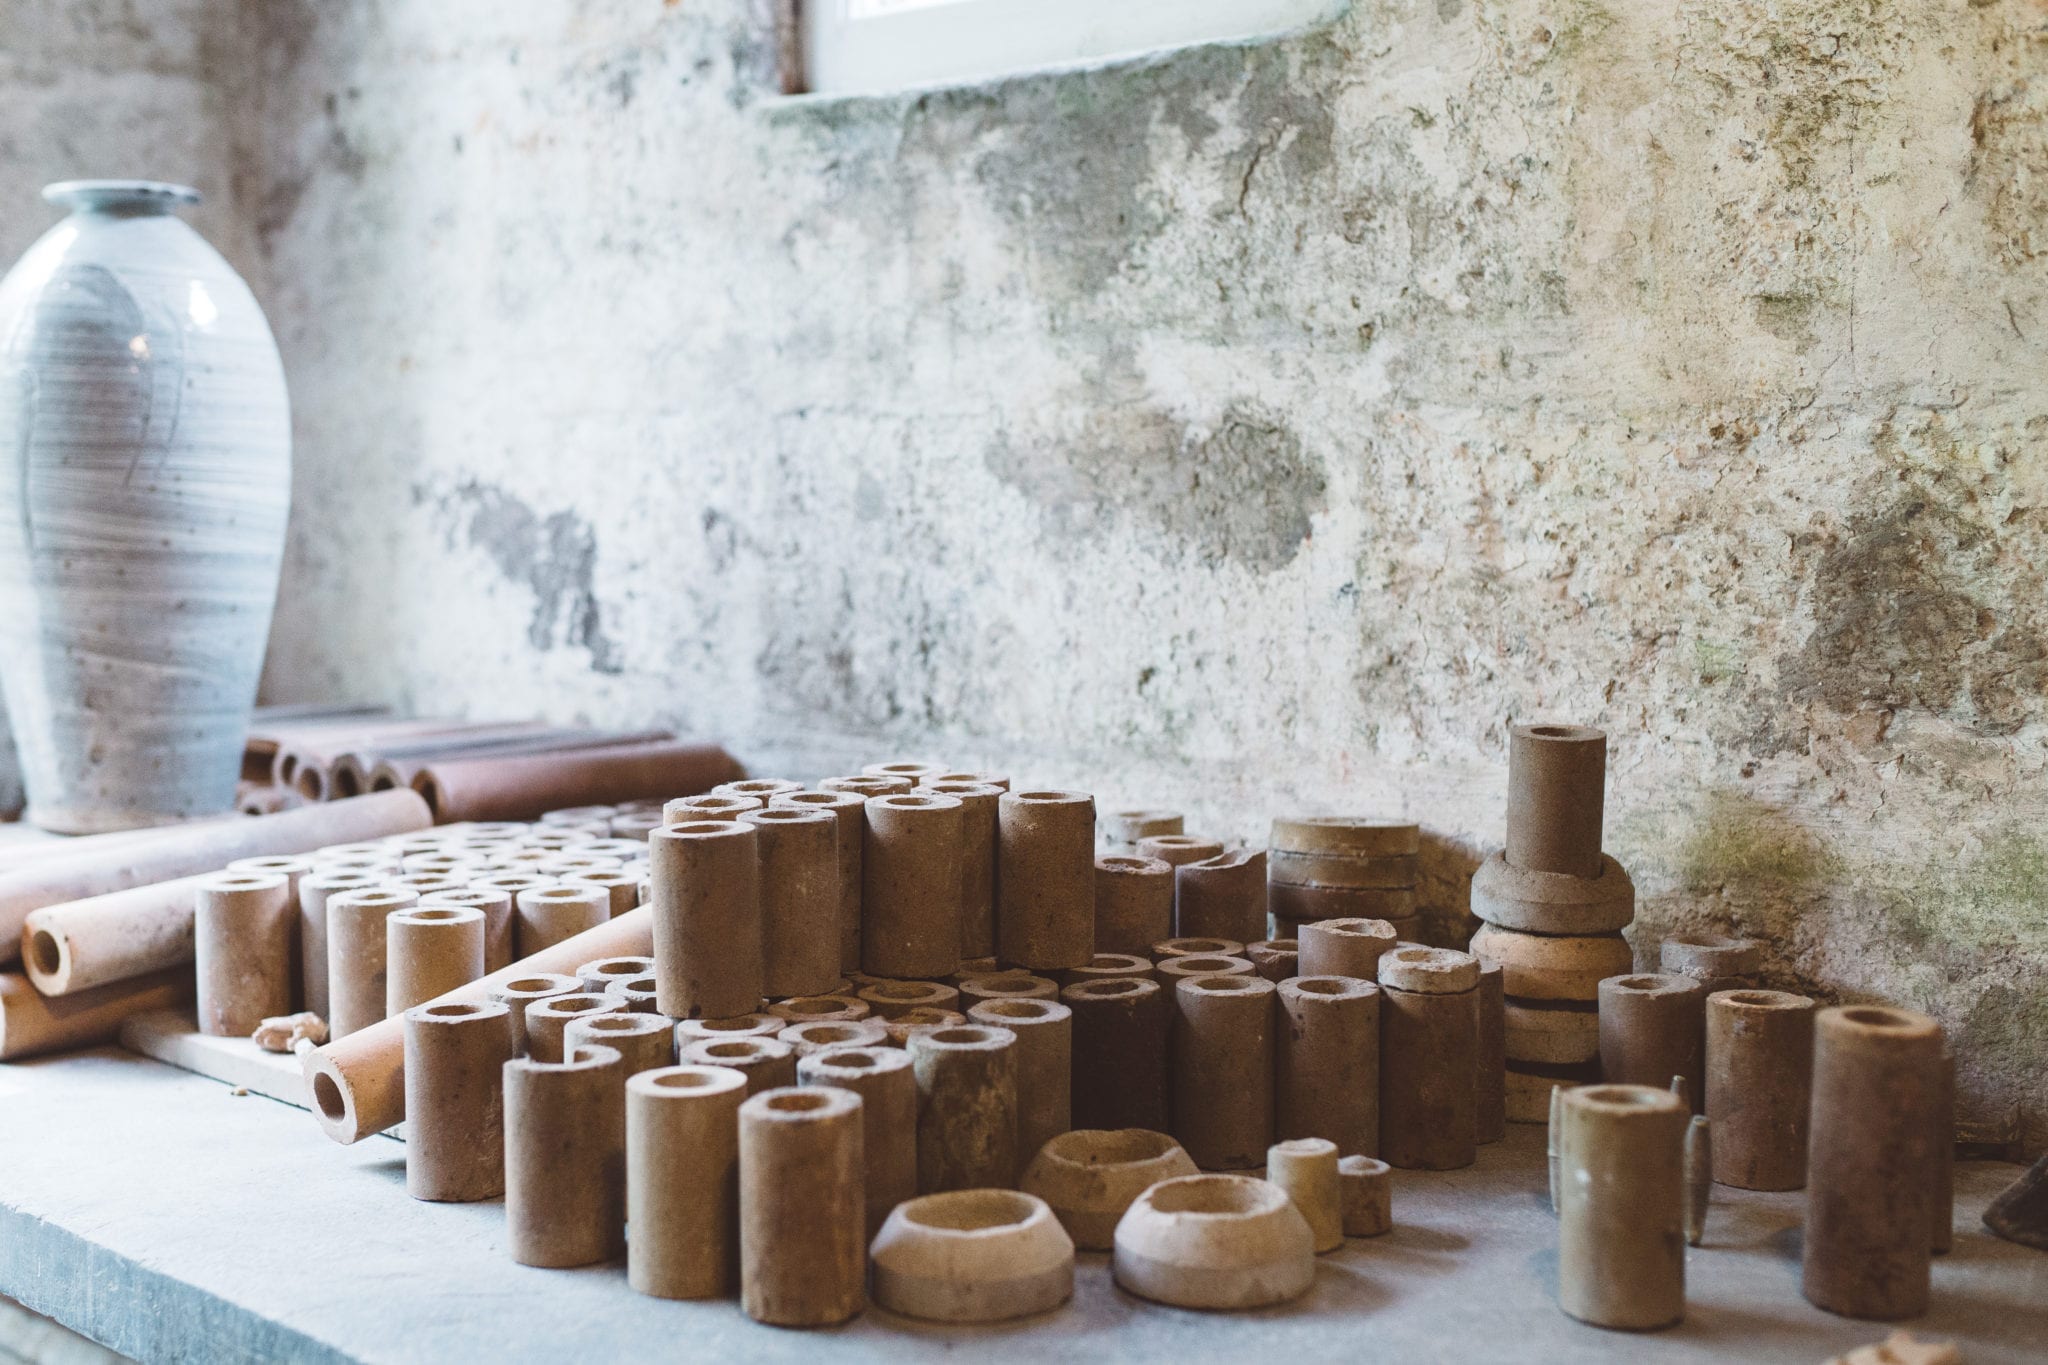 A collection of clay vessels ready to be fired